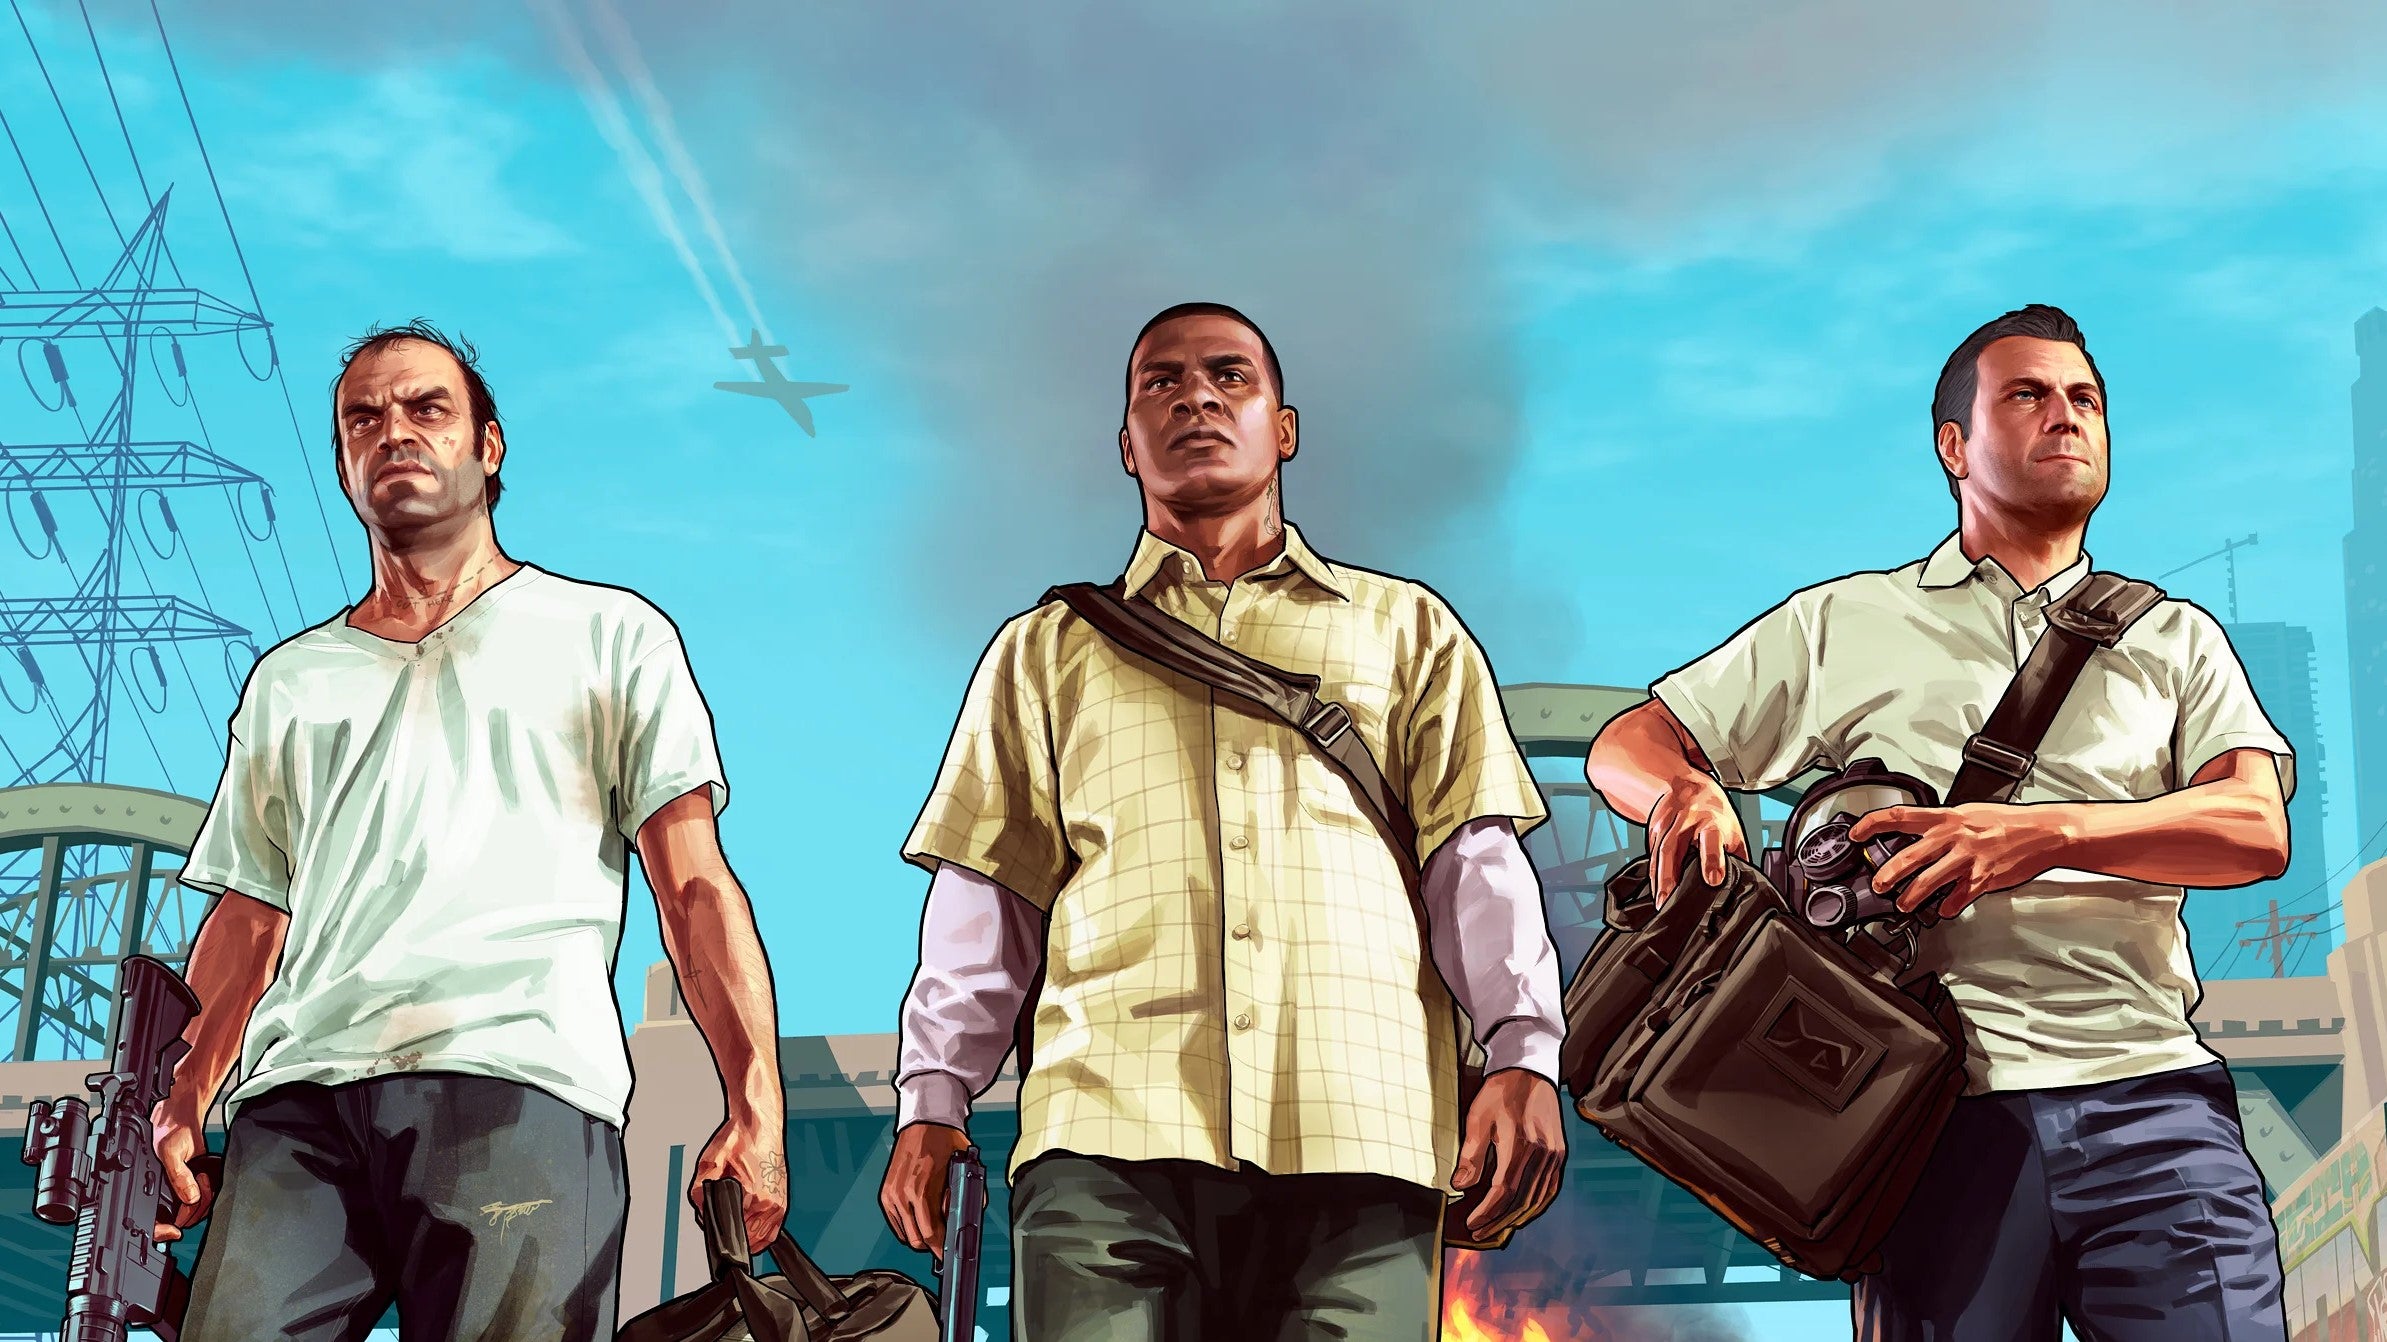 Rockstar Games Says GTA 6 Trailer To Debut on December 5th